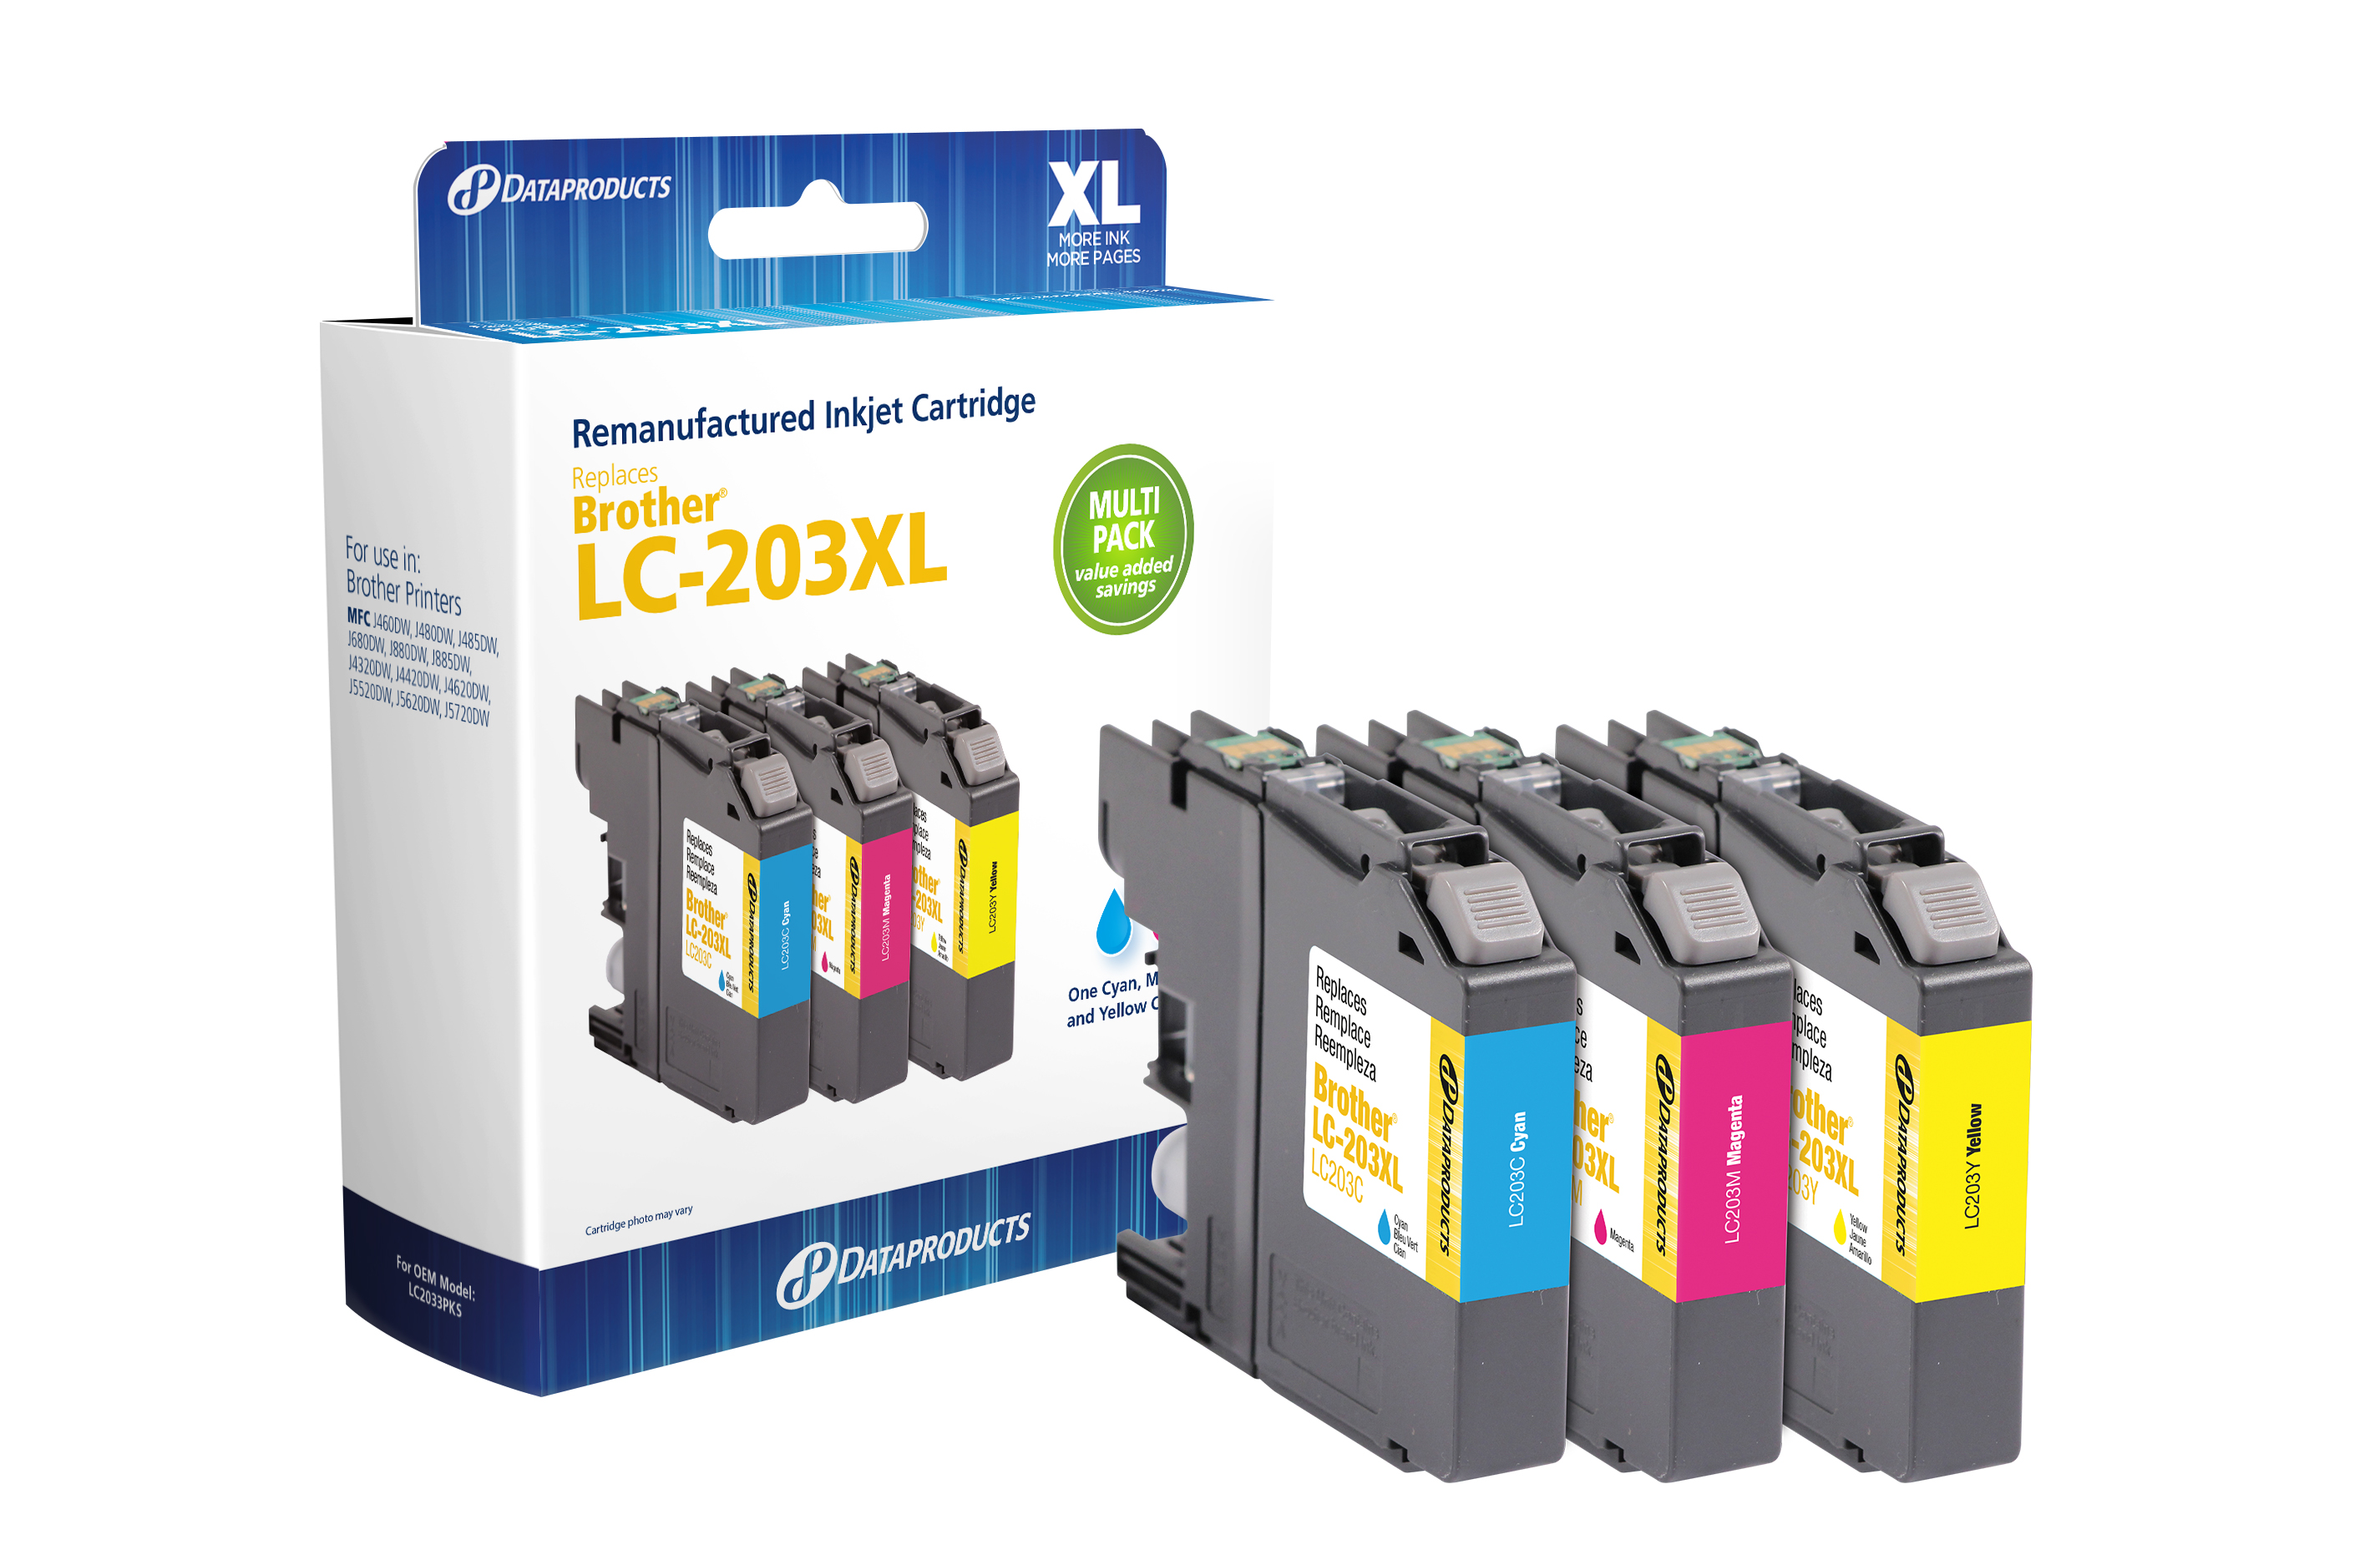 Dataproducts DPCLC203CMY Remanufactured Brother LC203XL Ink, High Yield, Cyan/Magenta/Yellow, Pack of 3